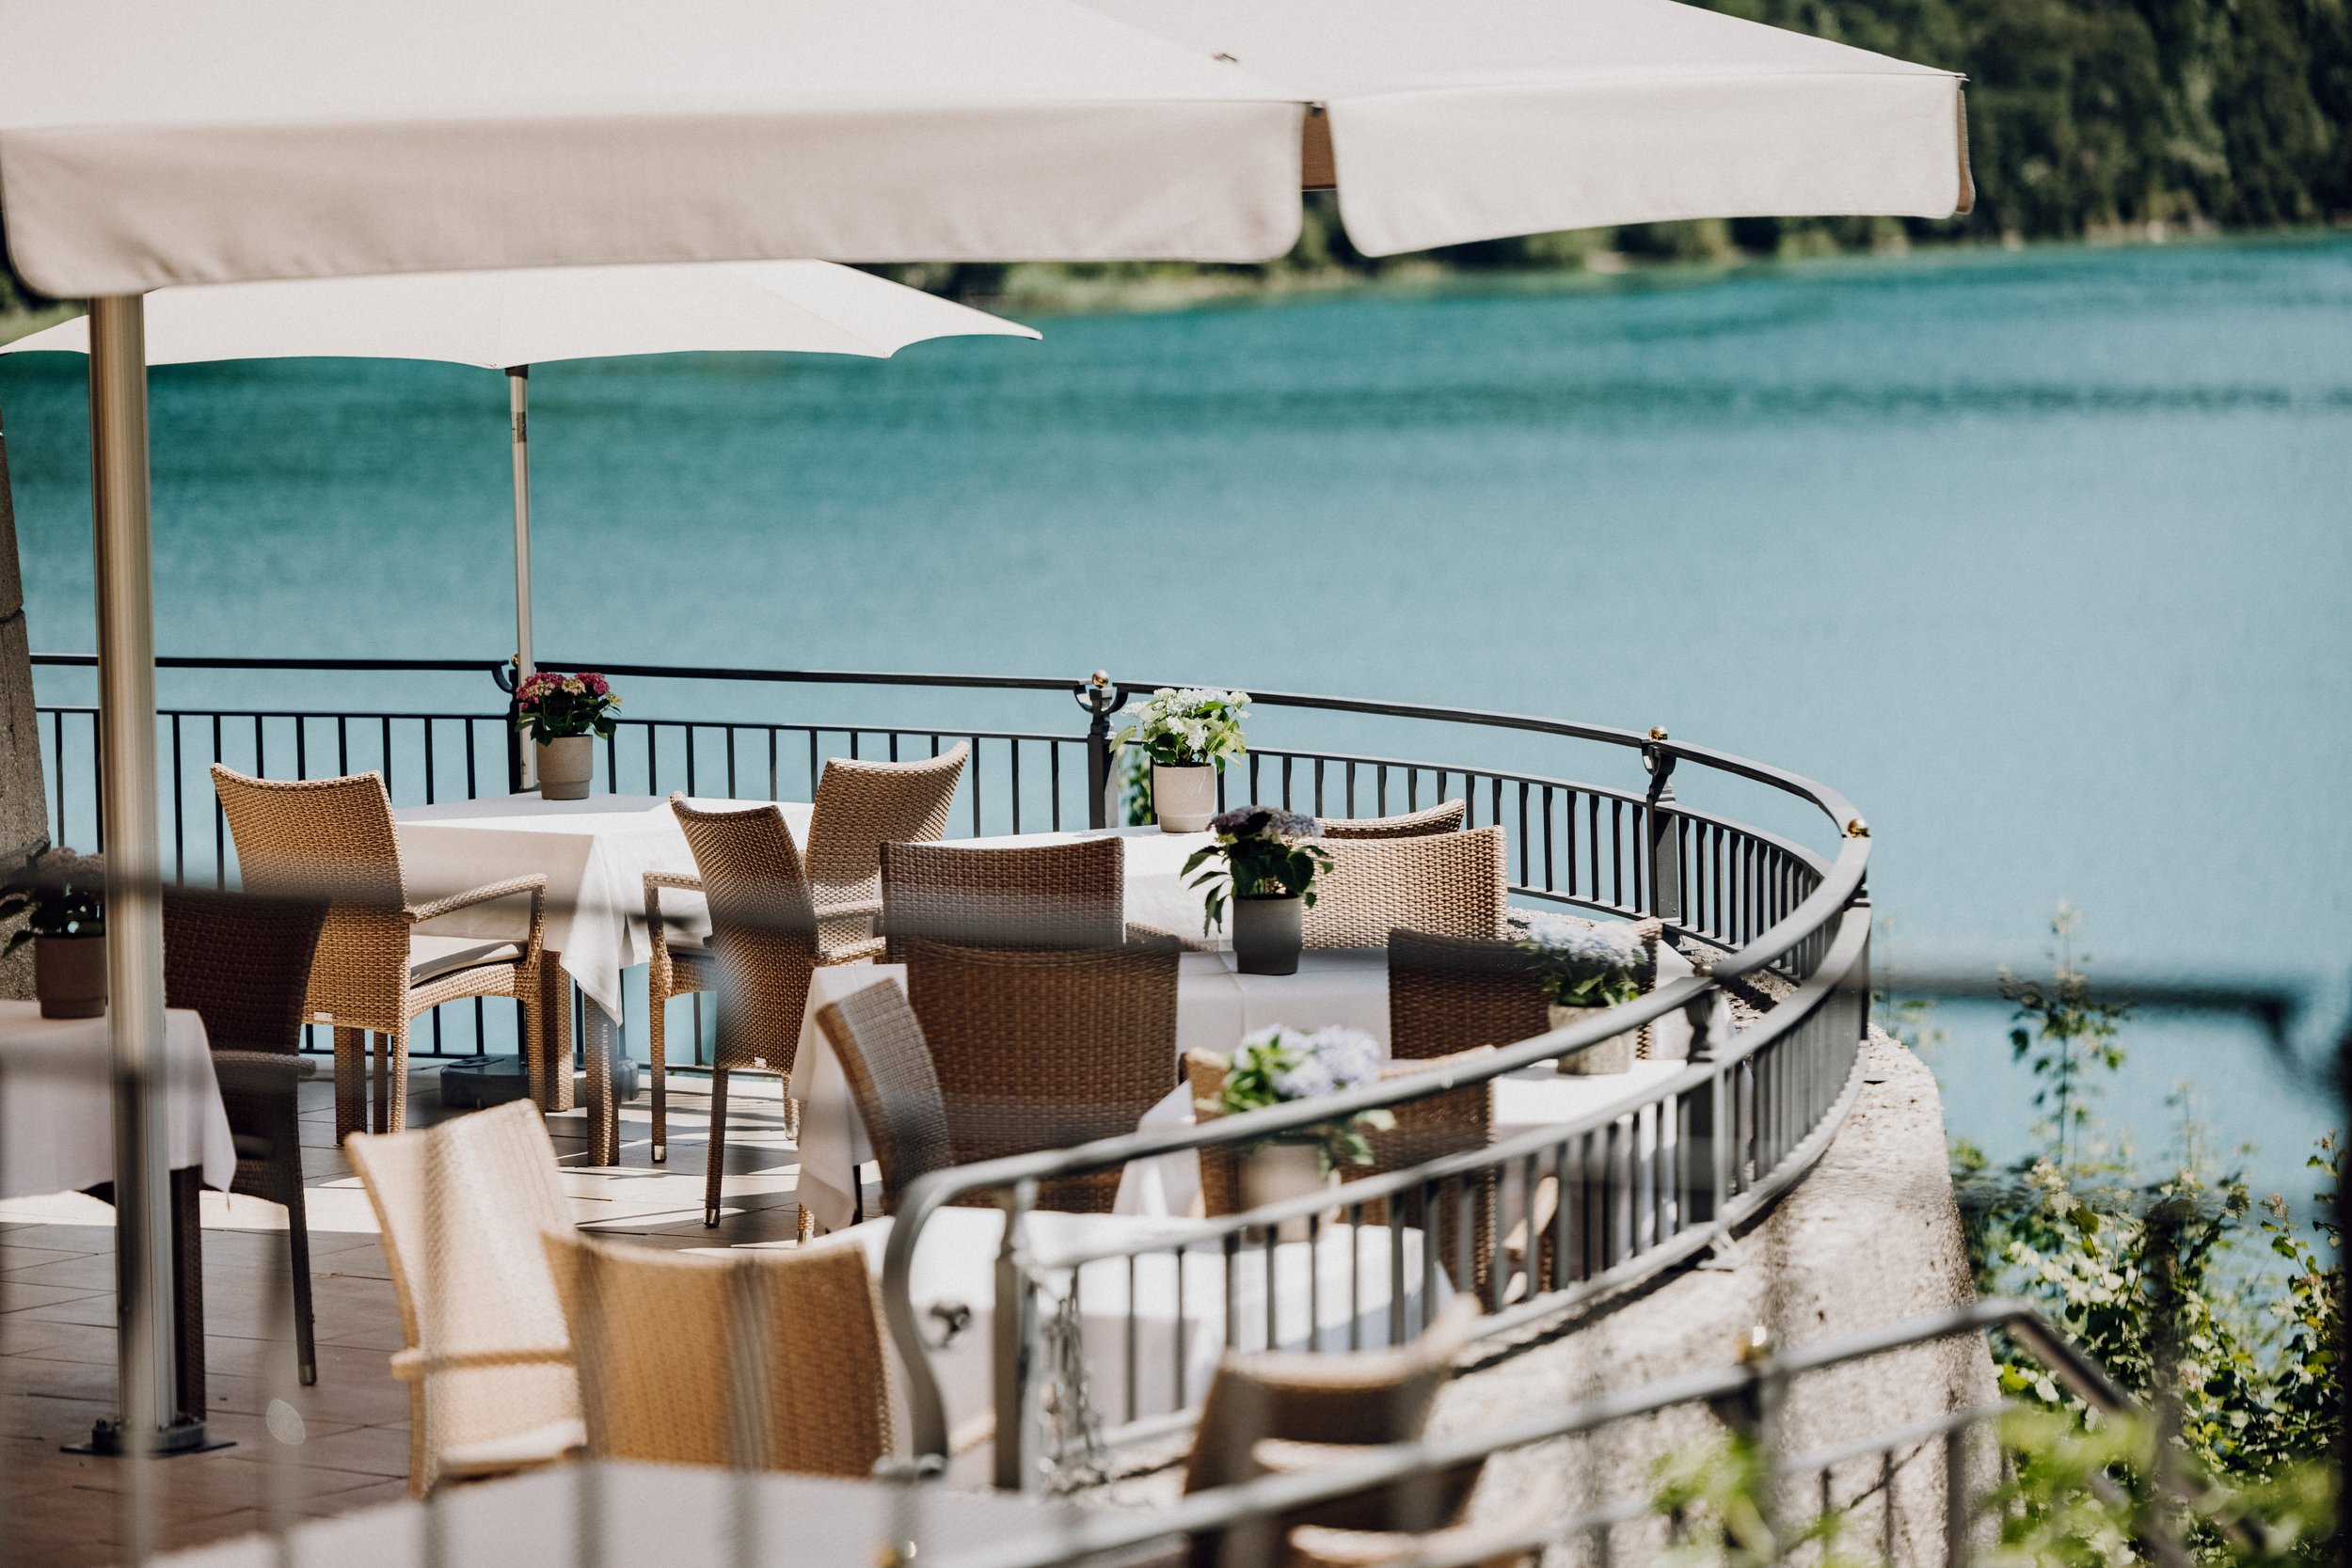 Dining overlooking Lake Fuschl at the Beach Club at Schloss Fuschl, a hotel in the Marriott Luxury Collection in Salzburg, Austria